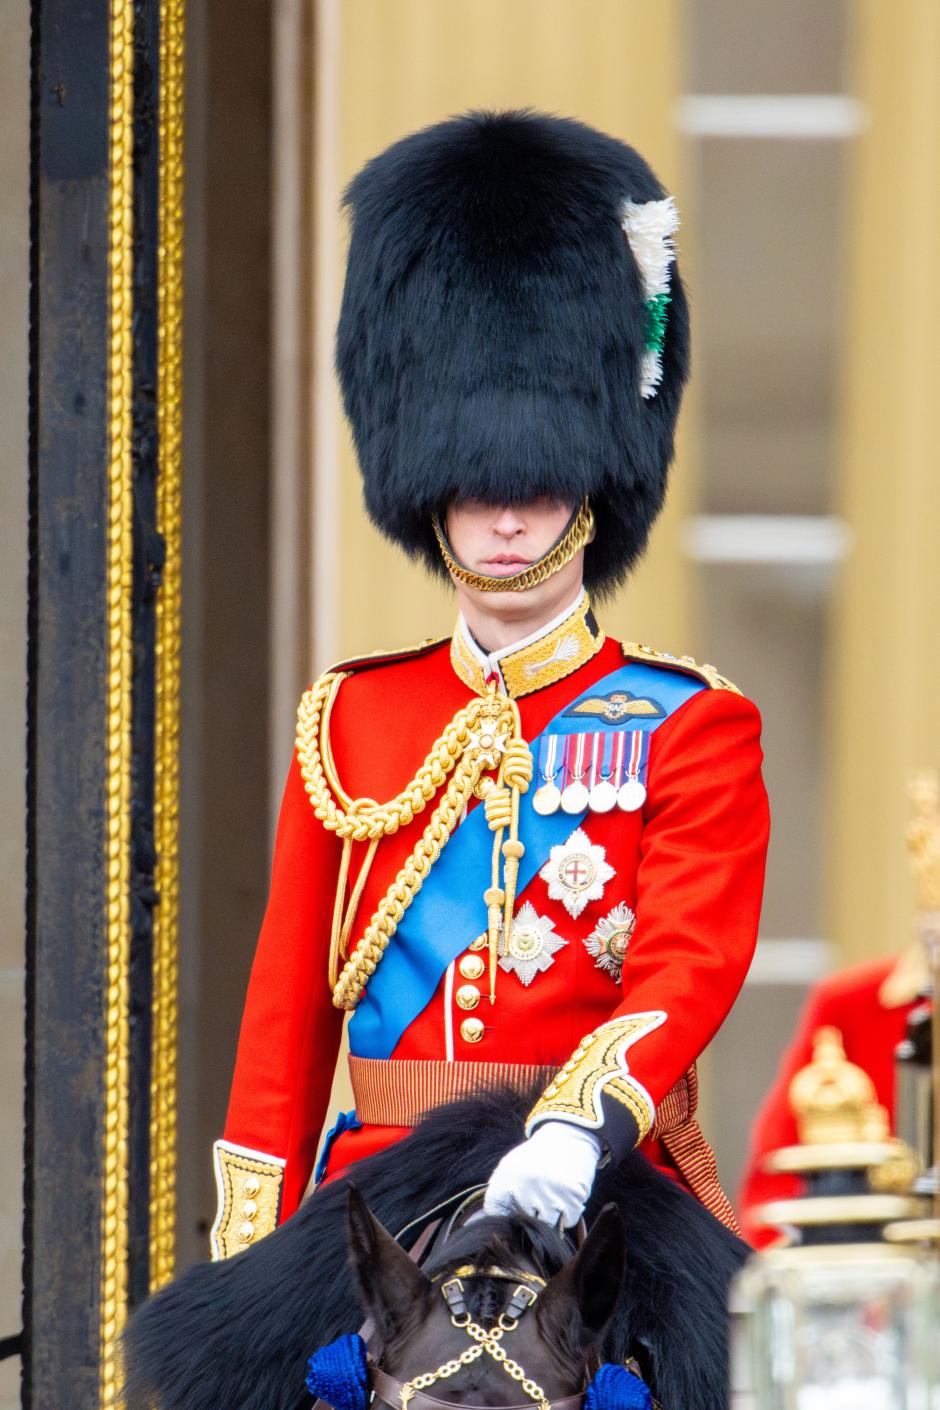 Point de Vue Out
Mandatory Credit: Photo by Shutterstock (14540779bg)
Prince William of Wales during Trooping the Colour 2024 ceremony, marking the monarch's official birthday in London.
Trooping The Colour, London, UK - 15 Jun 2024 *** Local Caption *** .